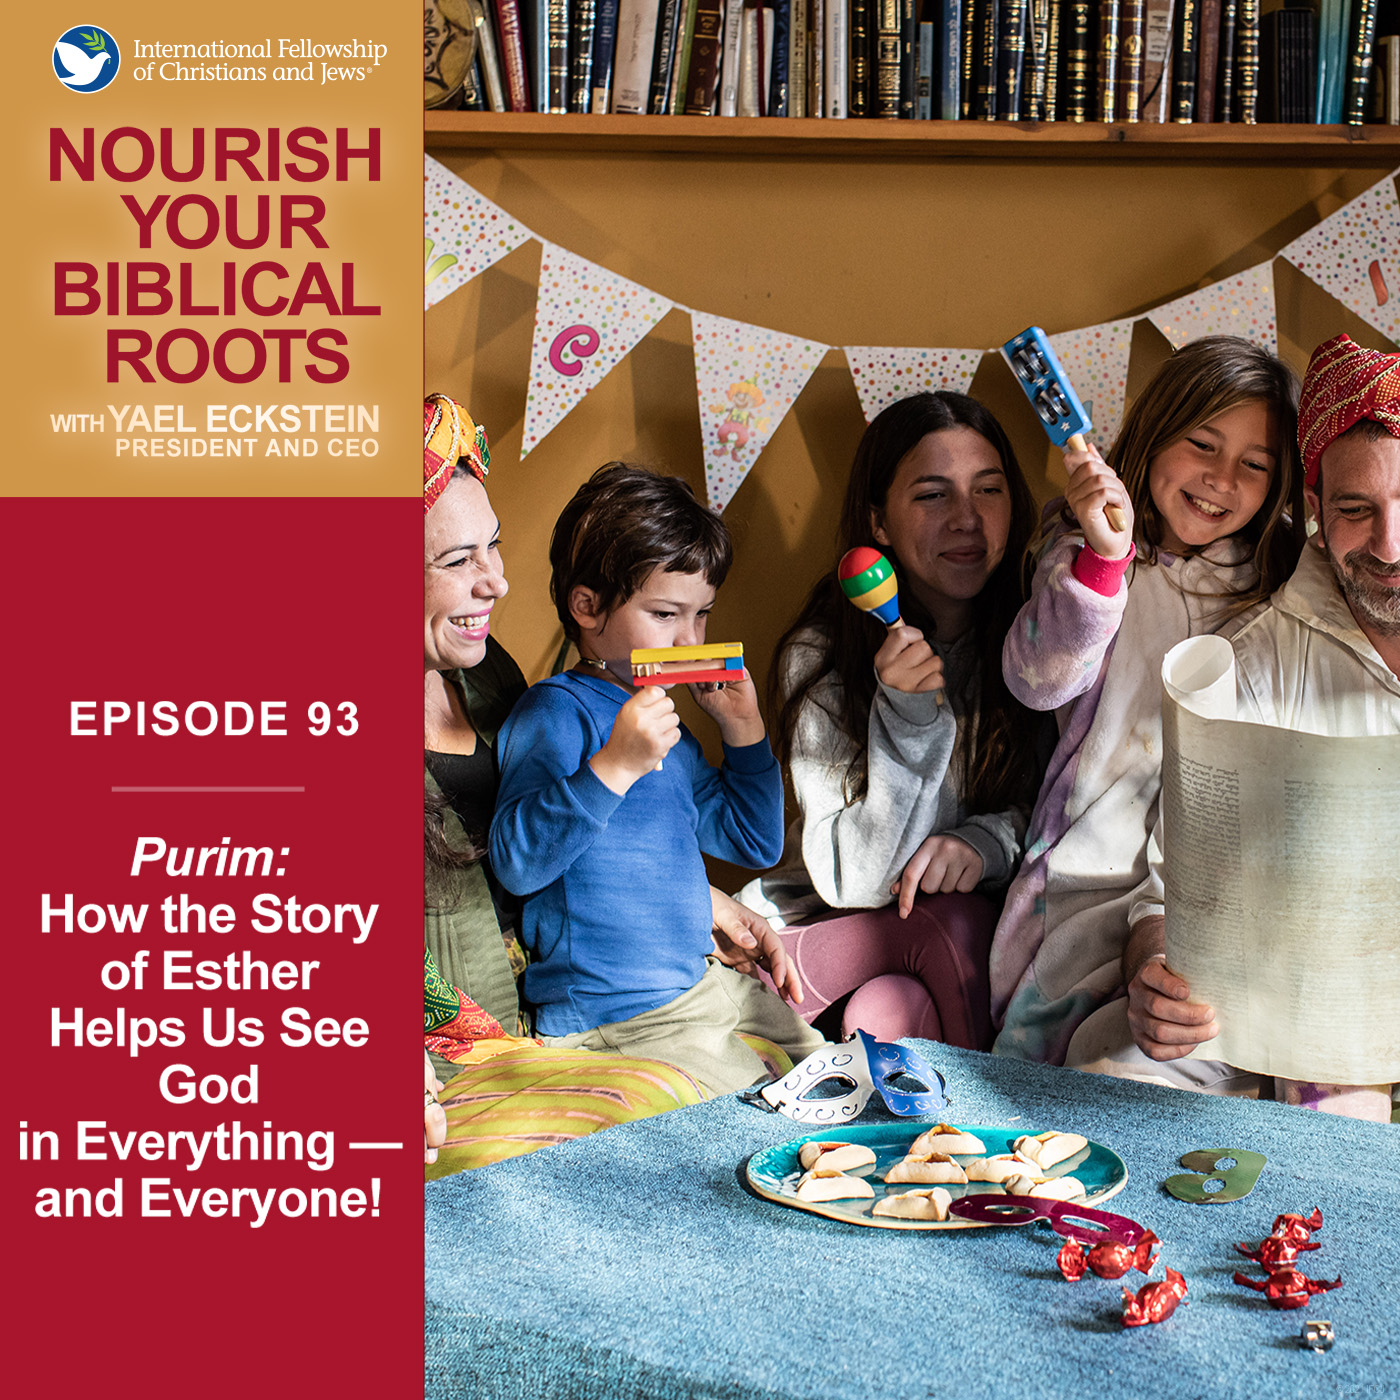 Purim: How the Story of Esther Helps Us See God in Everything -- and Everyone!